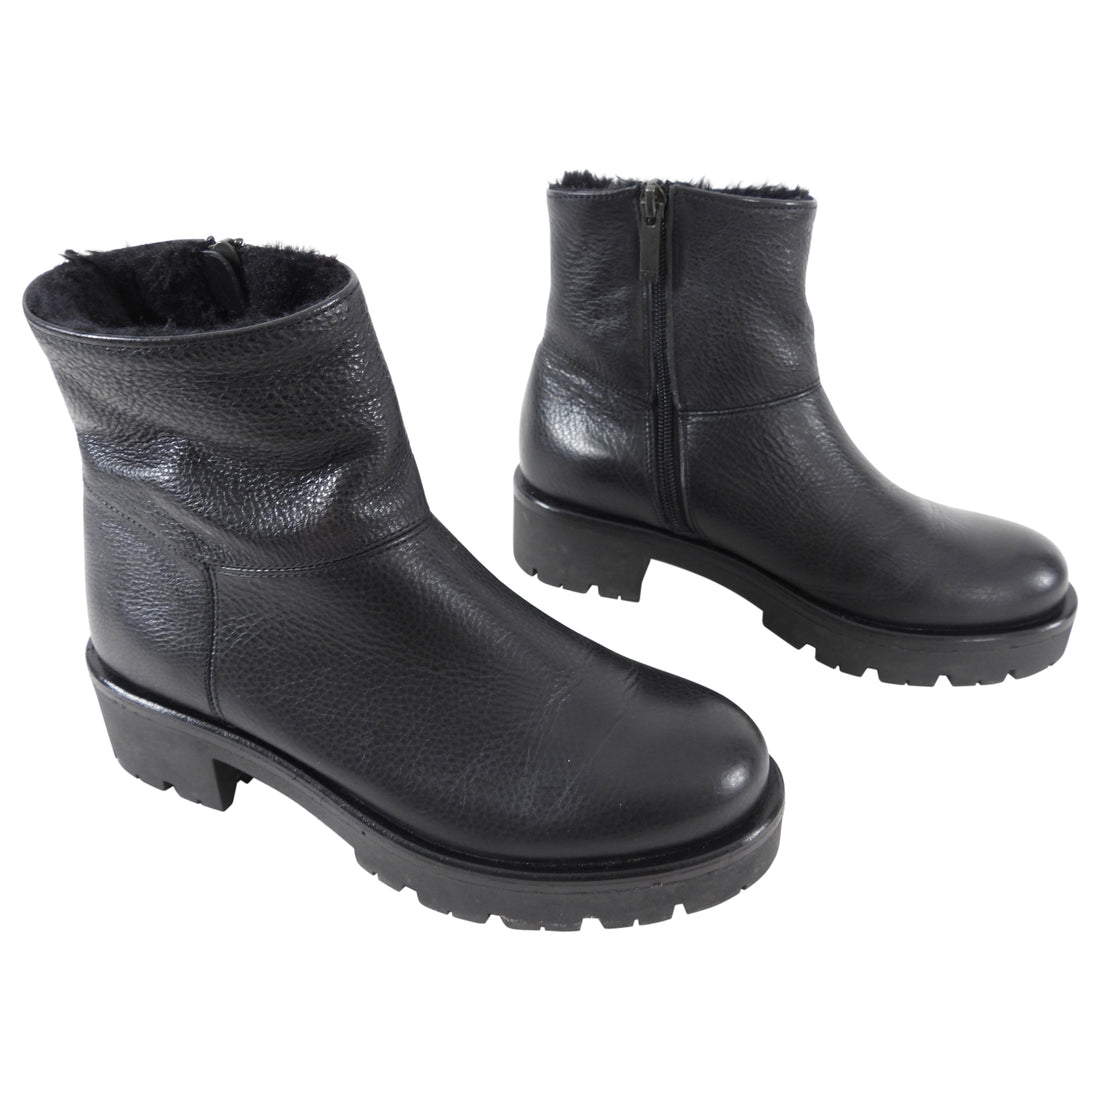 Aquatalia Black Leather Shearling Ankle Boots.  Round toe, rubber track sole, interior ankle zipper, and shearling lined interior.  Size 37.  Excellent gently pre-owned condition.  Without box or duster.